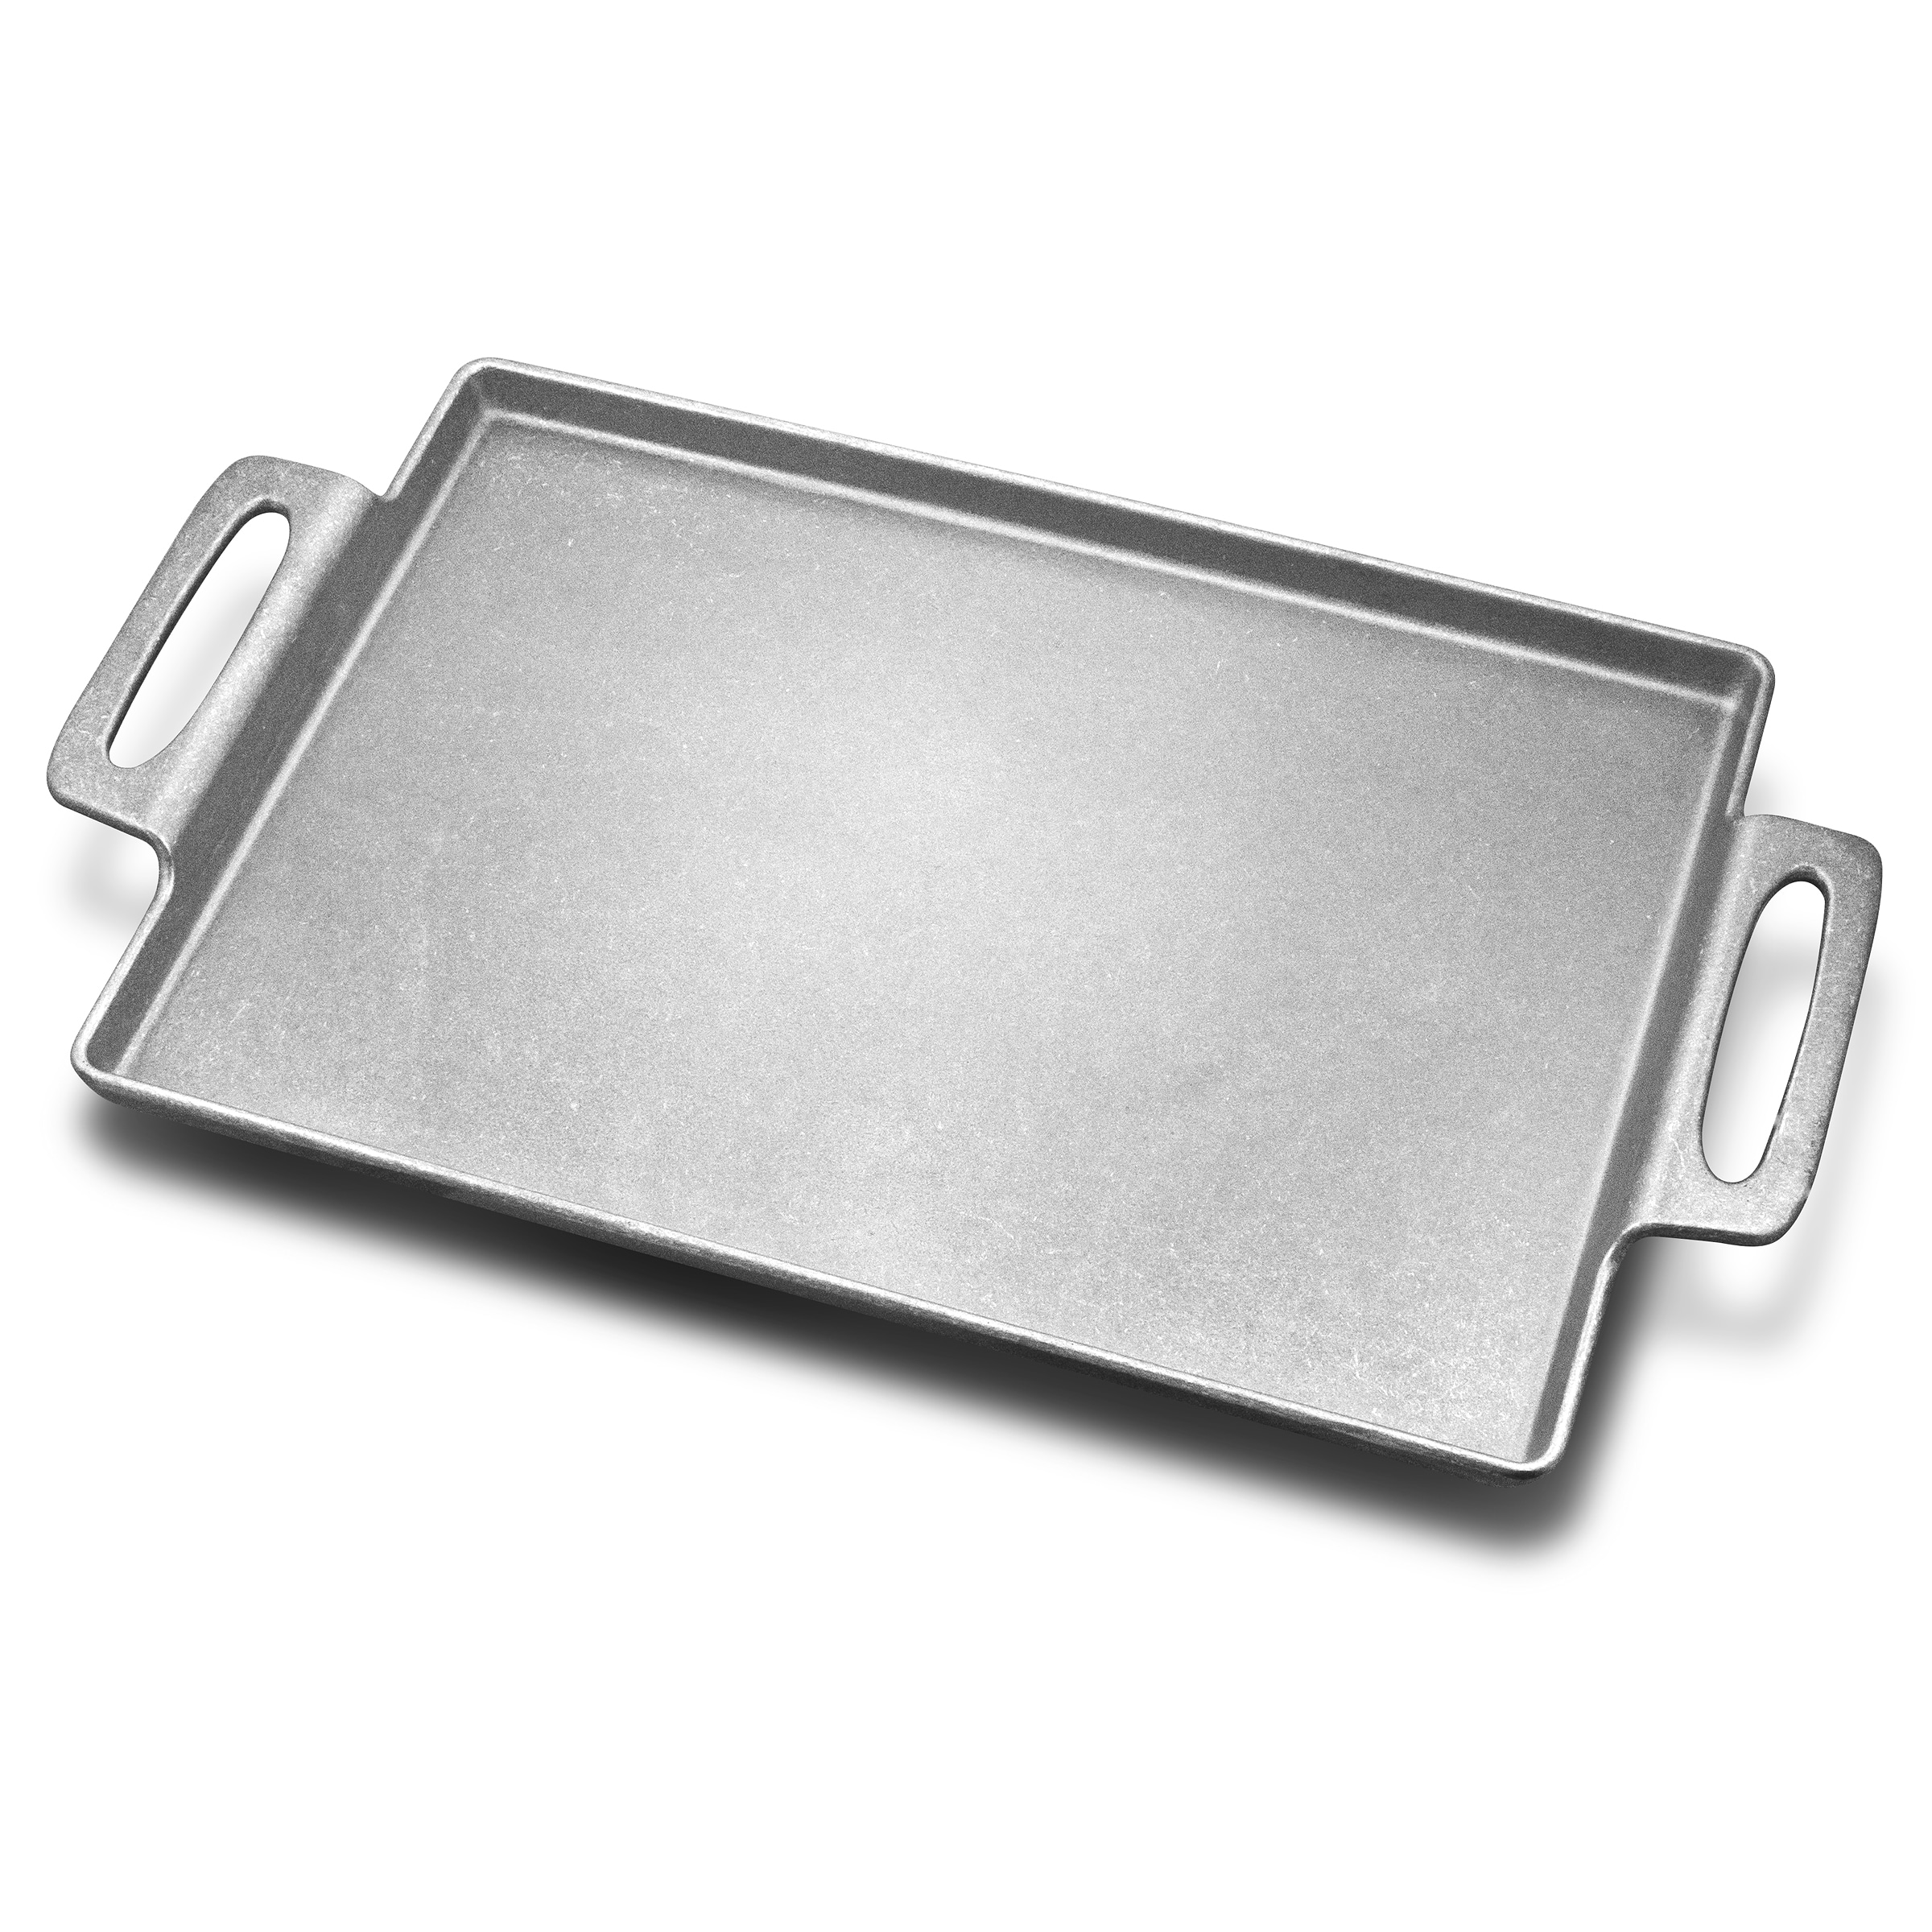 Wilton Armetale Gourmet Grillware Griddle with Handles